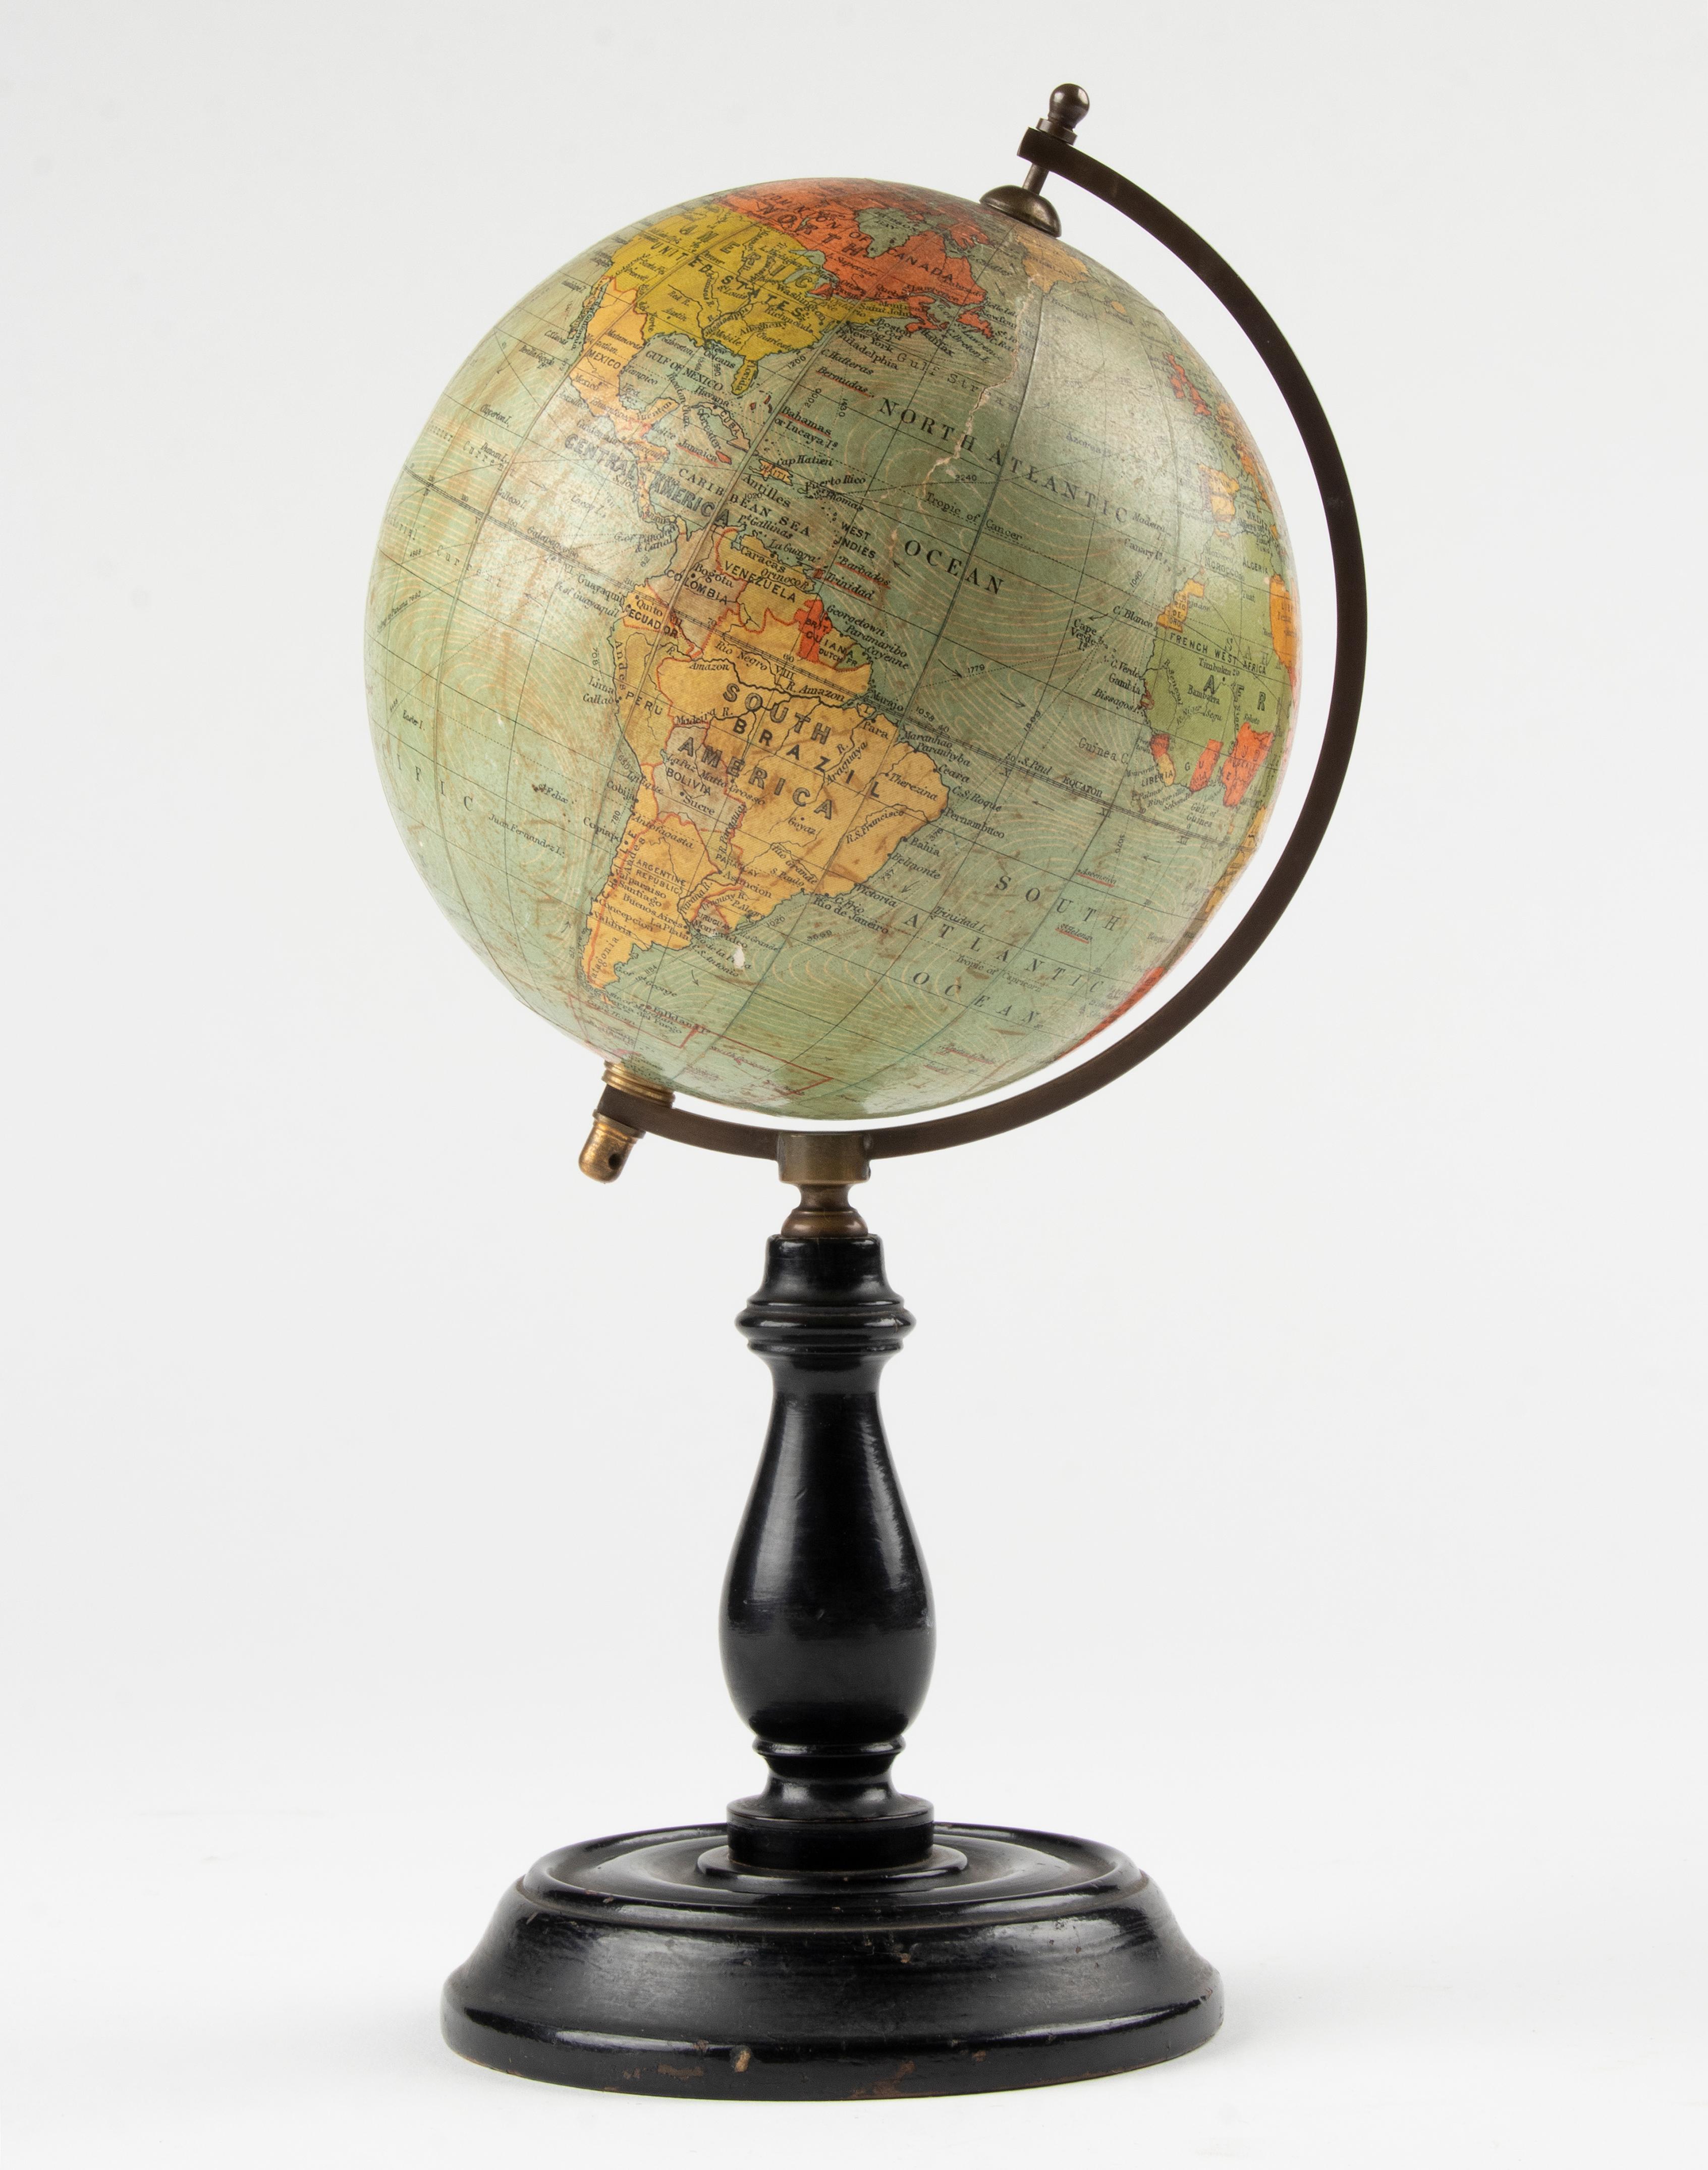 A lovely small size antique French globe. With a wooden base, the globe itself is made of carton with paper. The map is published by Philips Terrestrial from London. Due to its small size, this is a special globe. It is in very nice condition with